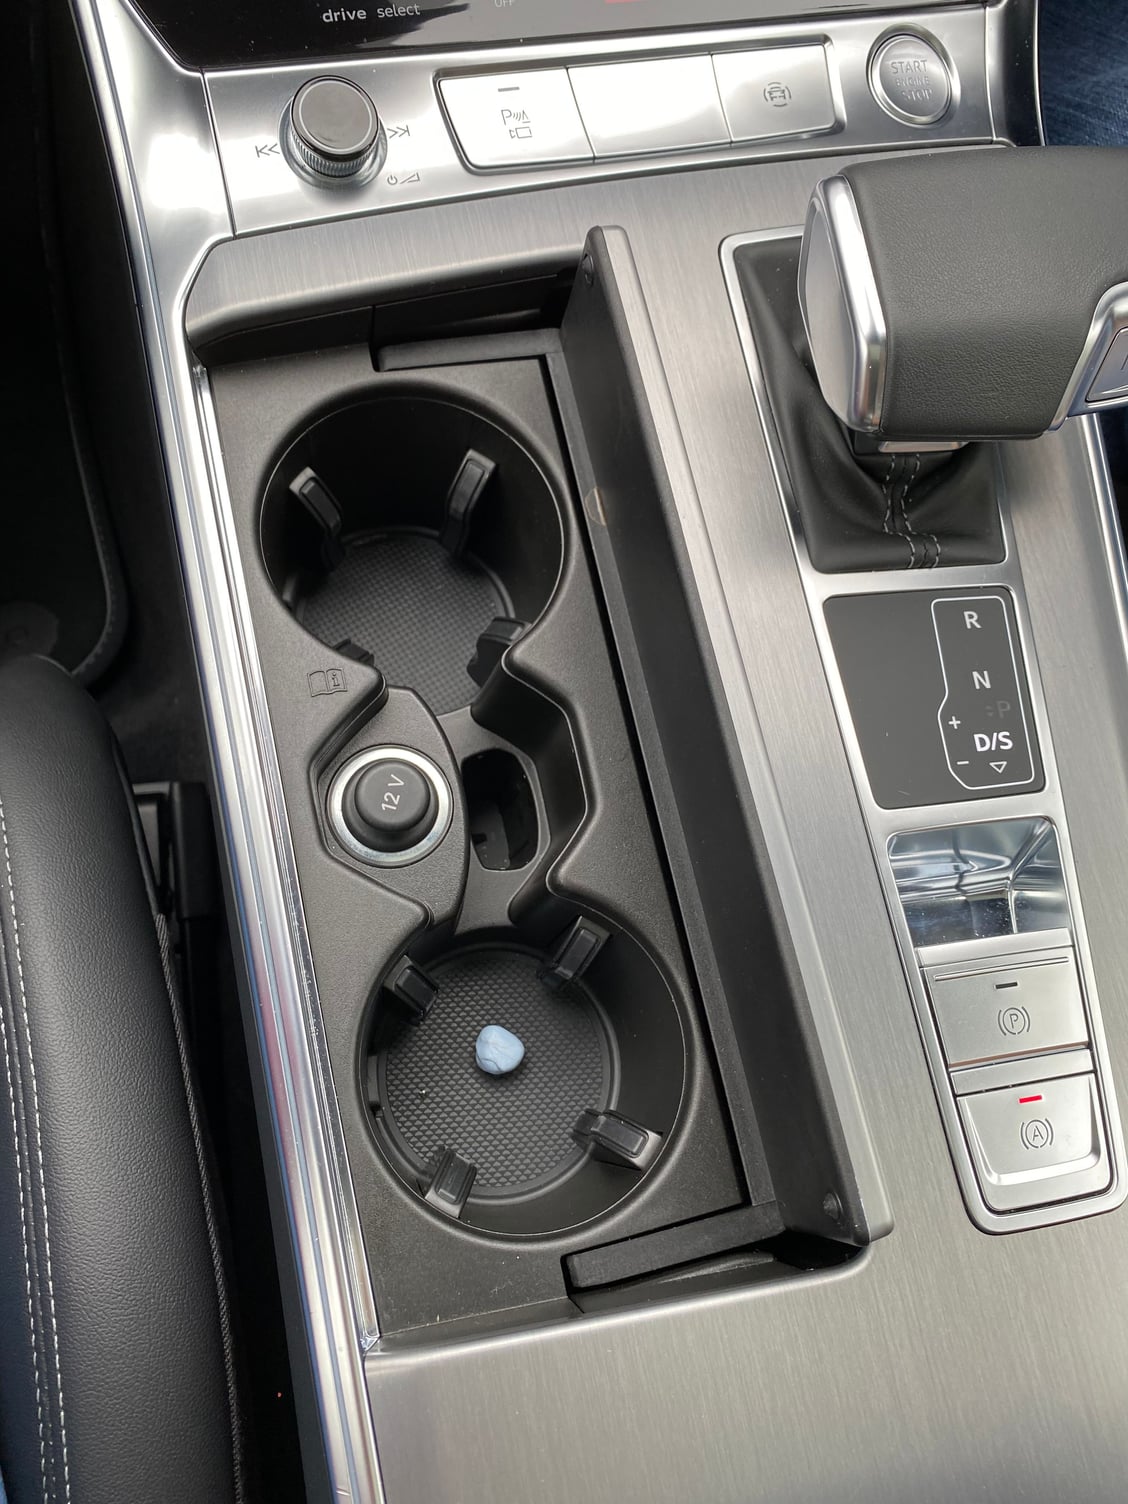 Cup holder cover stuck in open position -  Forums